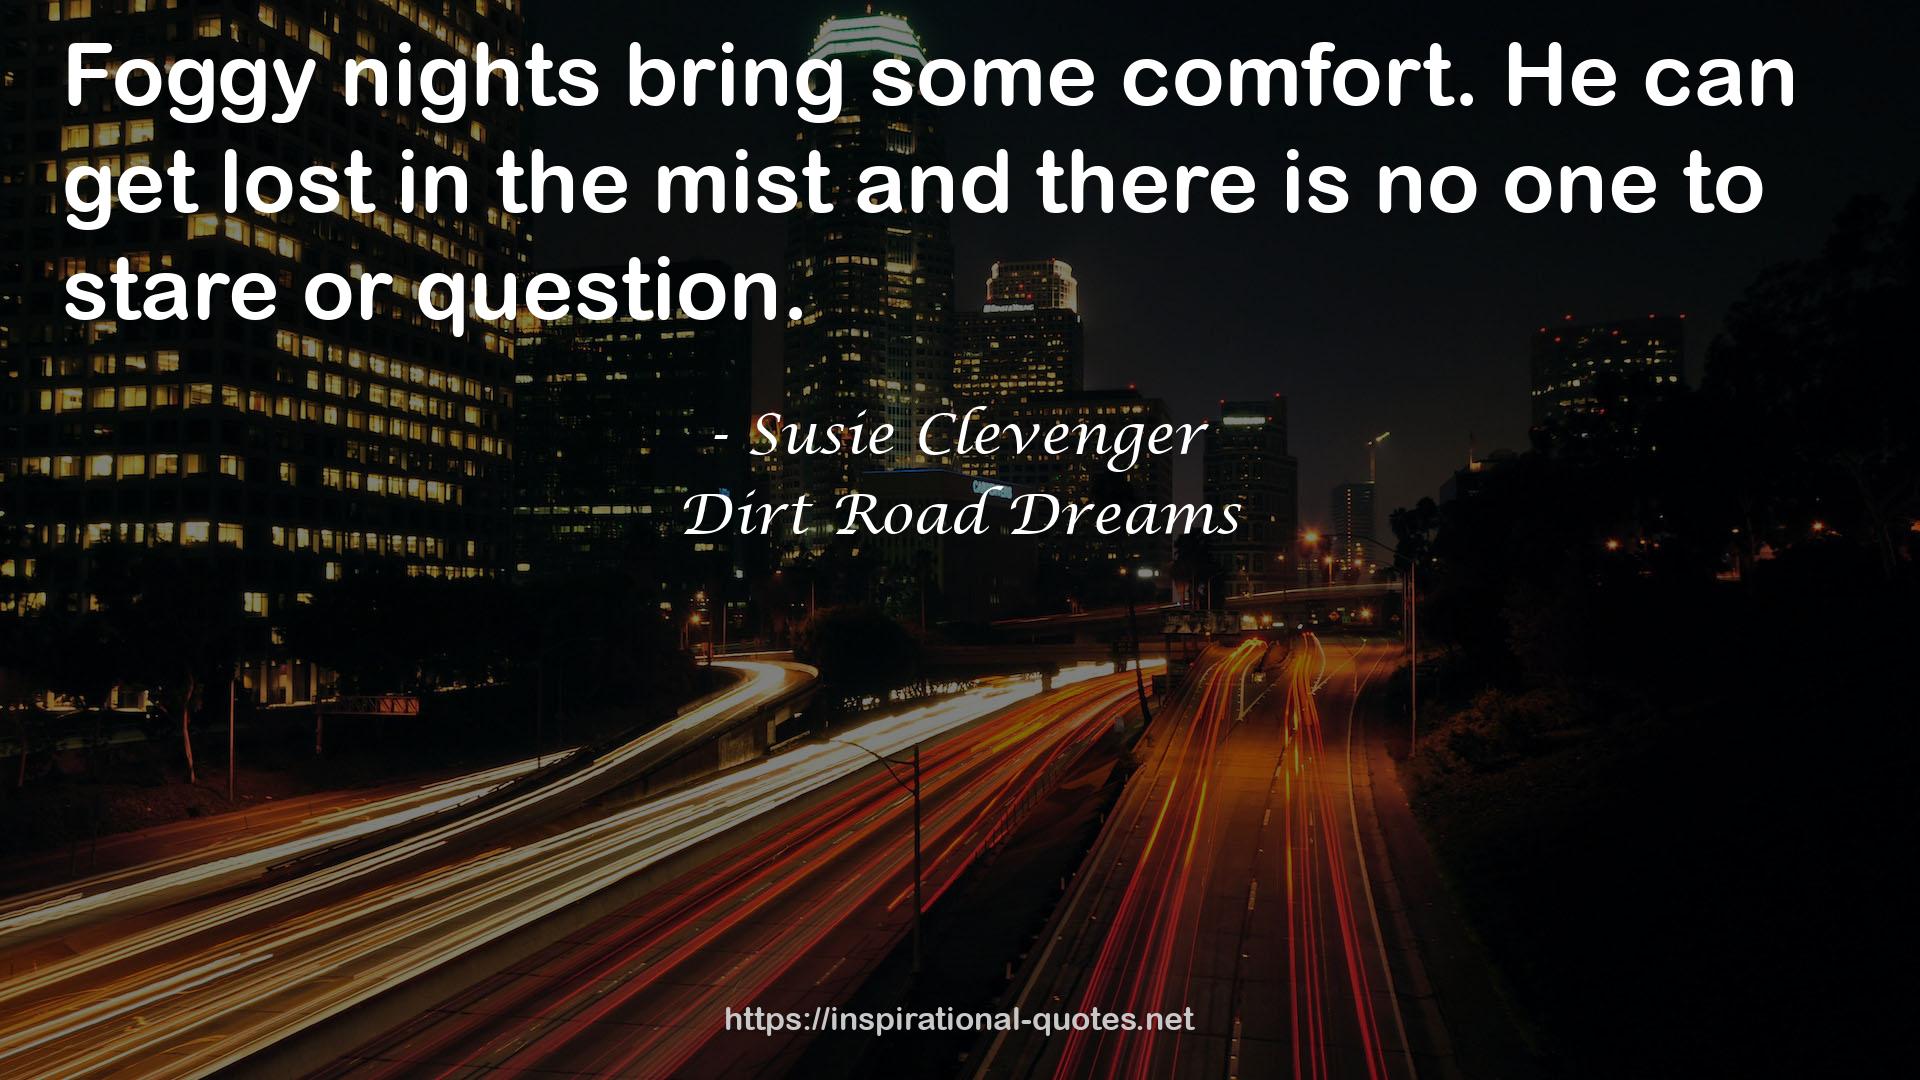 Susie Clevenger QUOTES